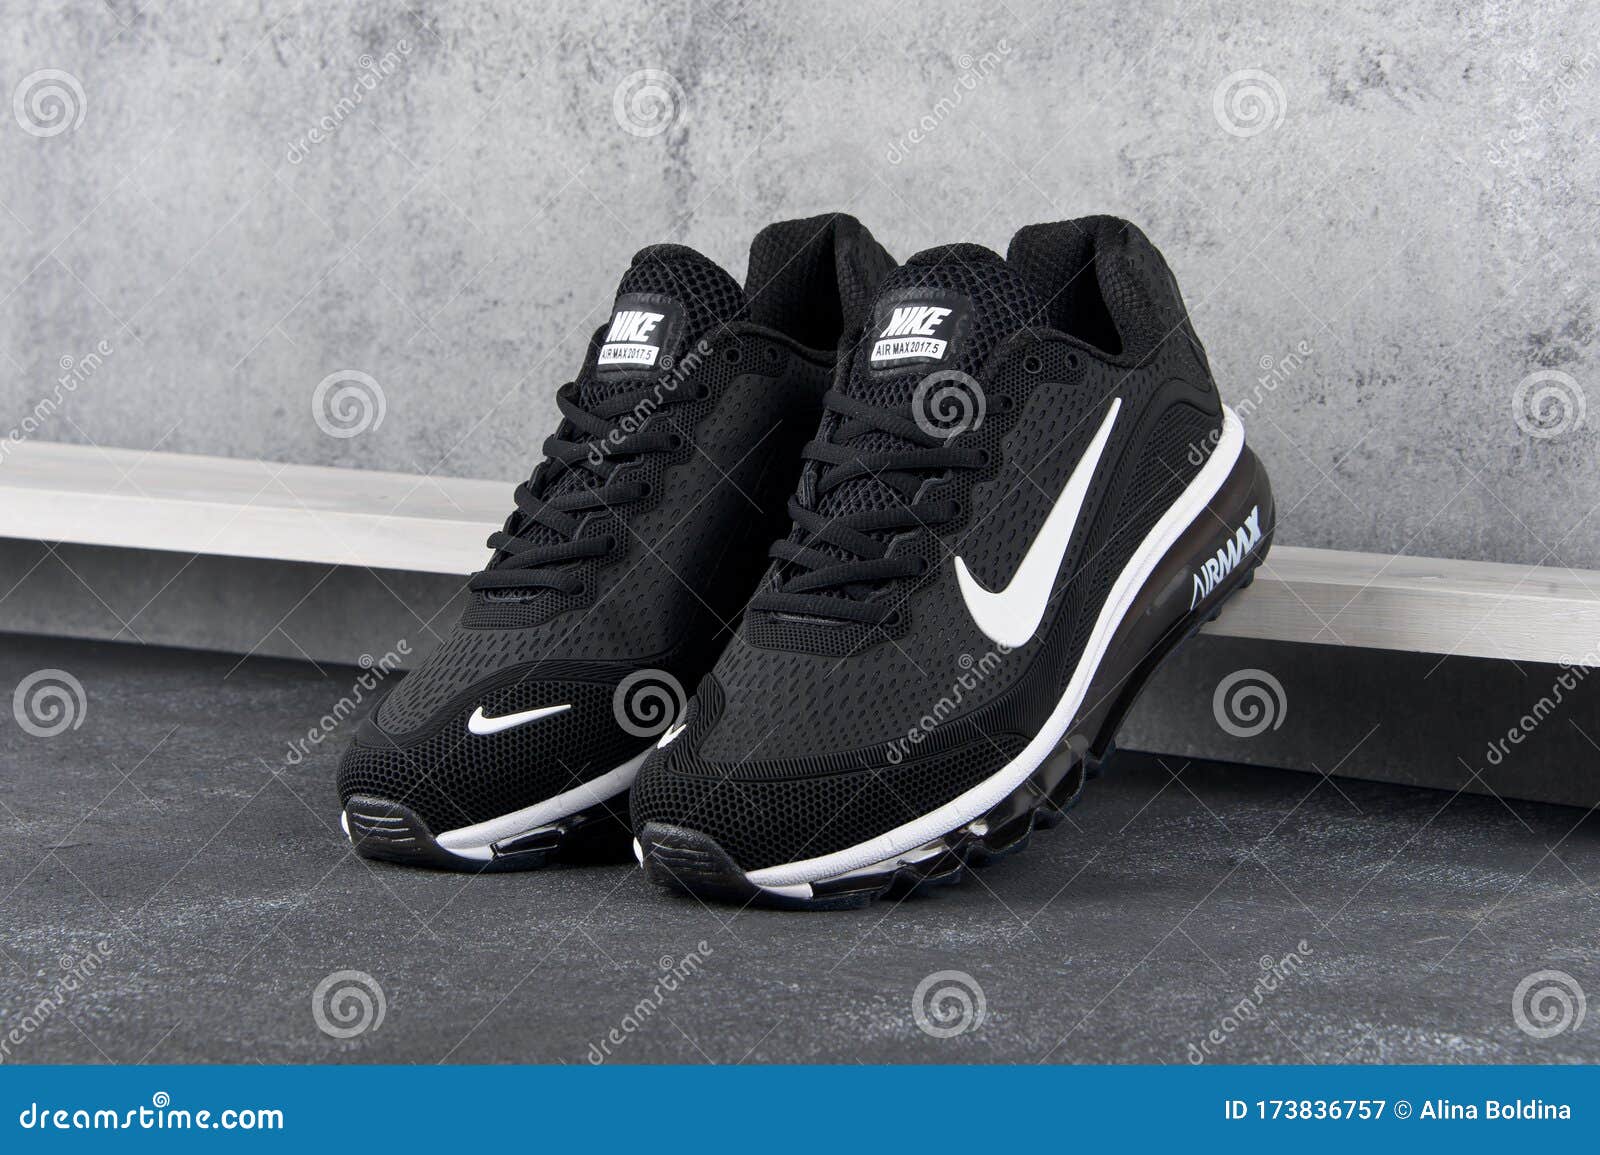 nike shoes with extended back